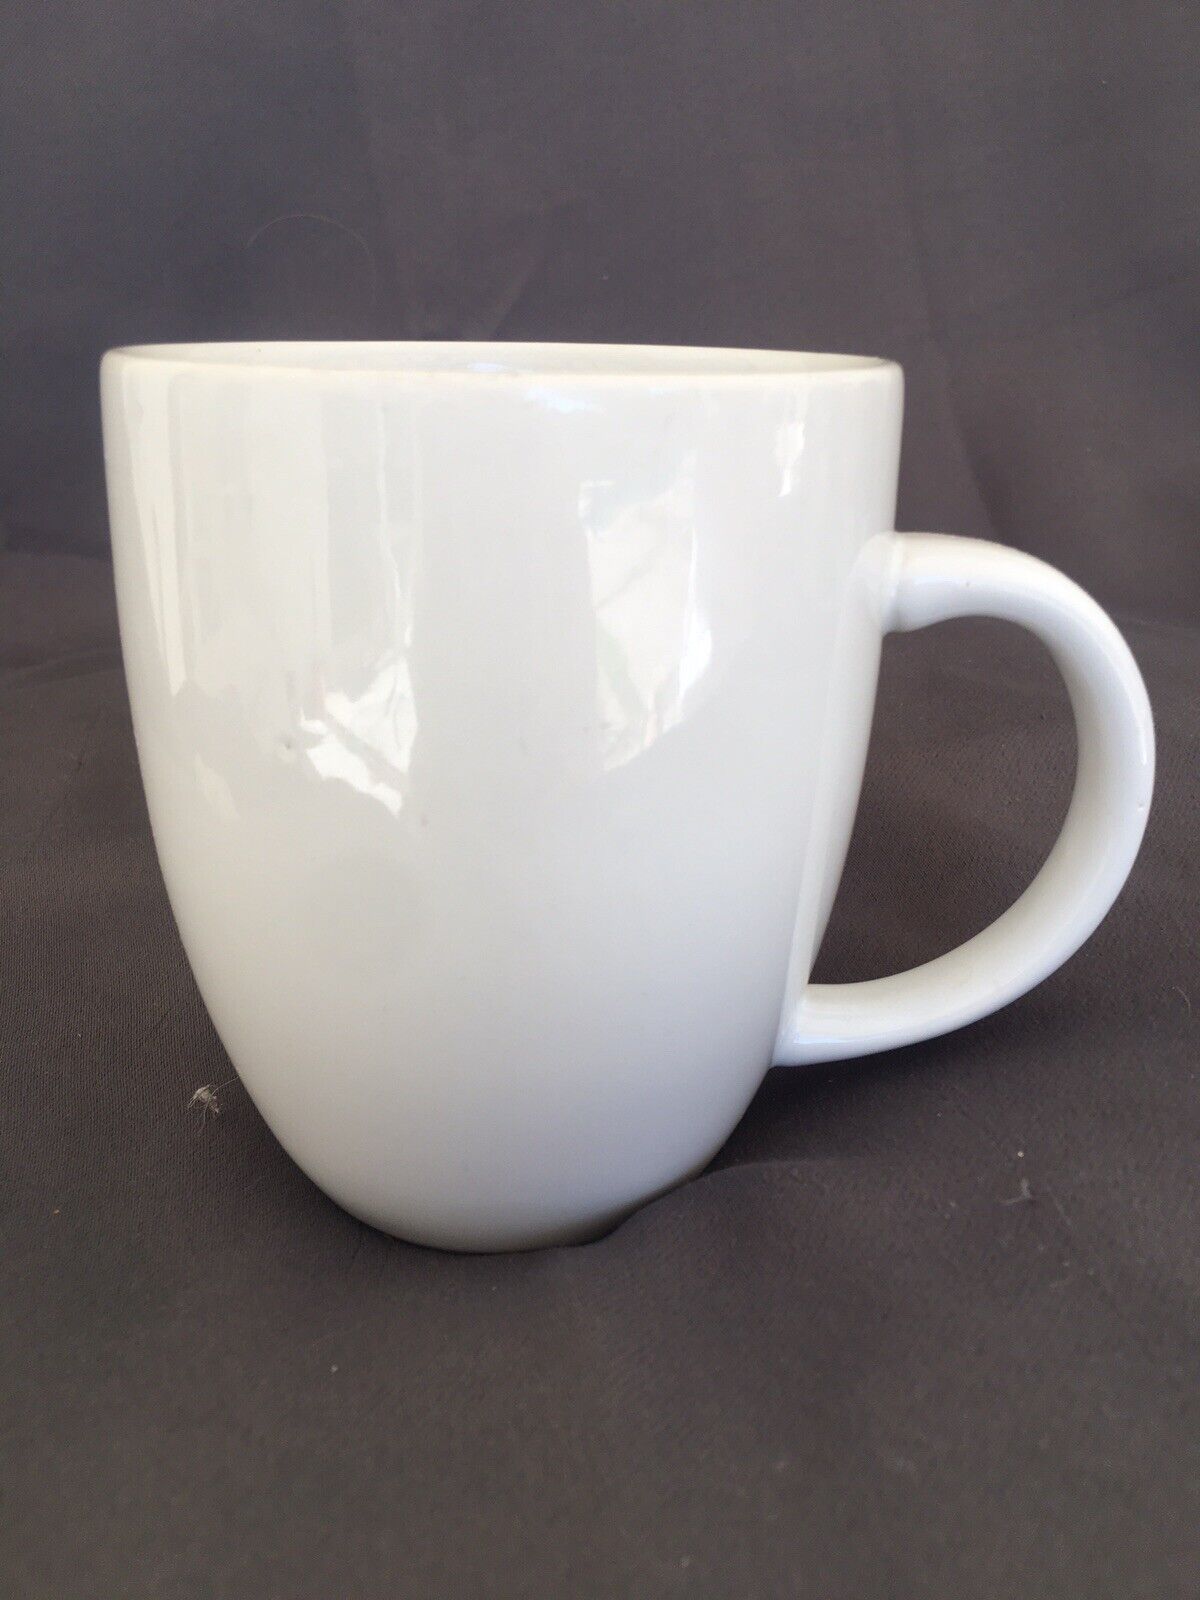 THRESHOLD White Porcelain 14oz. Coupe Coffee Mug Tea Cup TARGET Replacement 